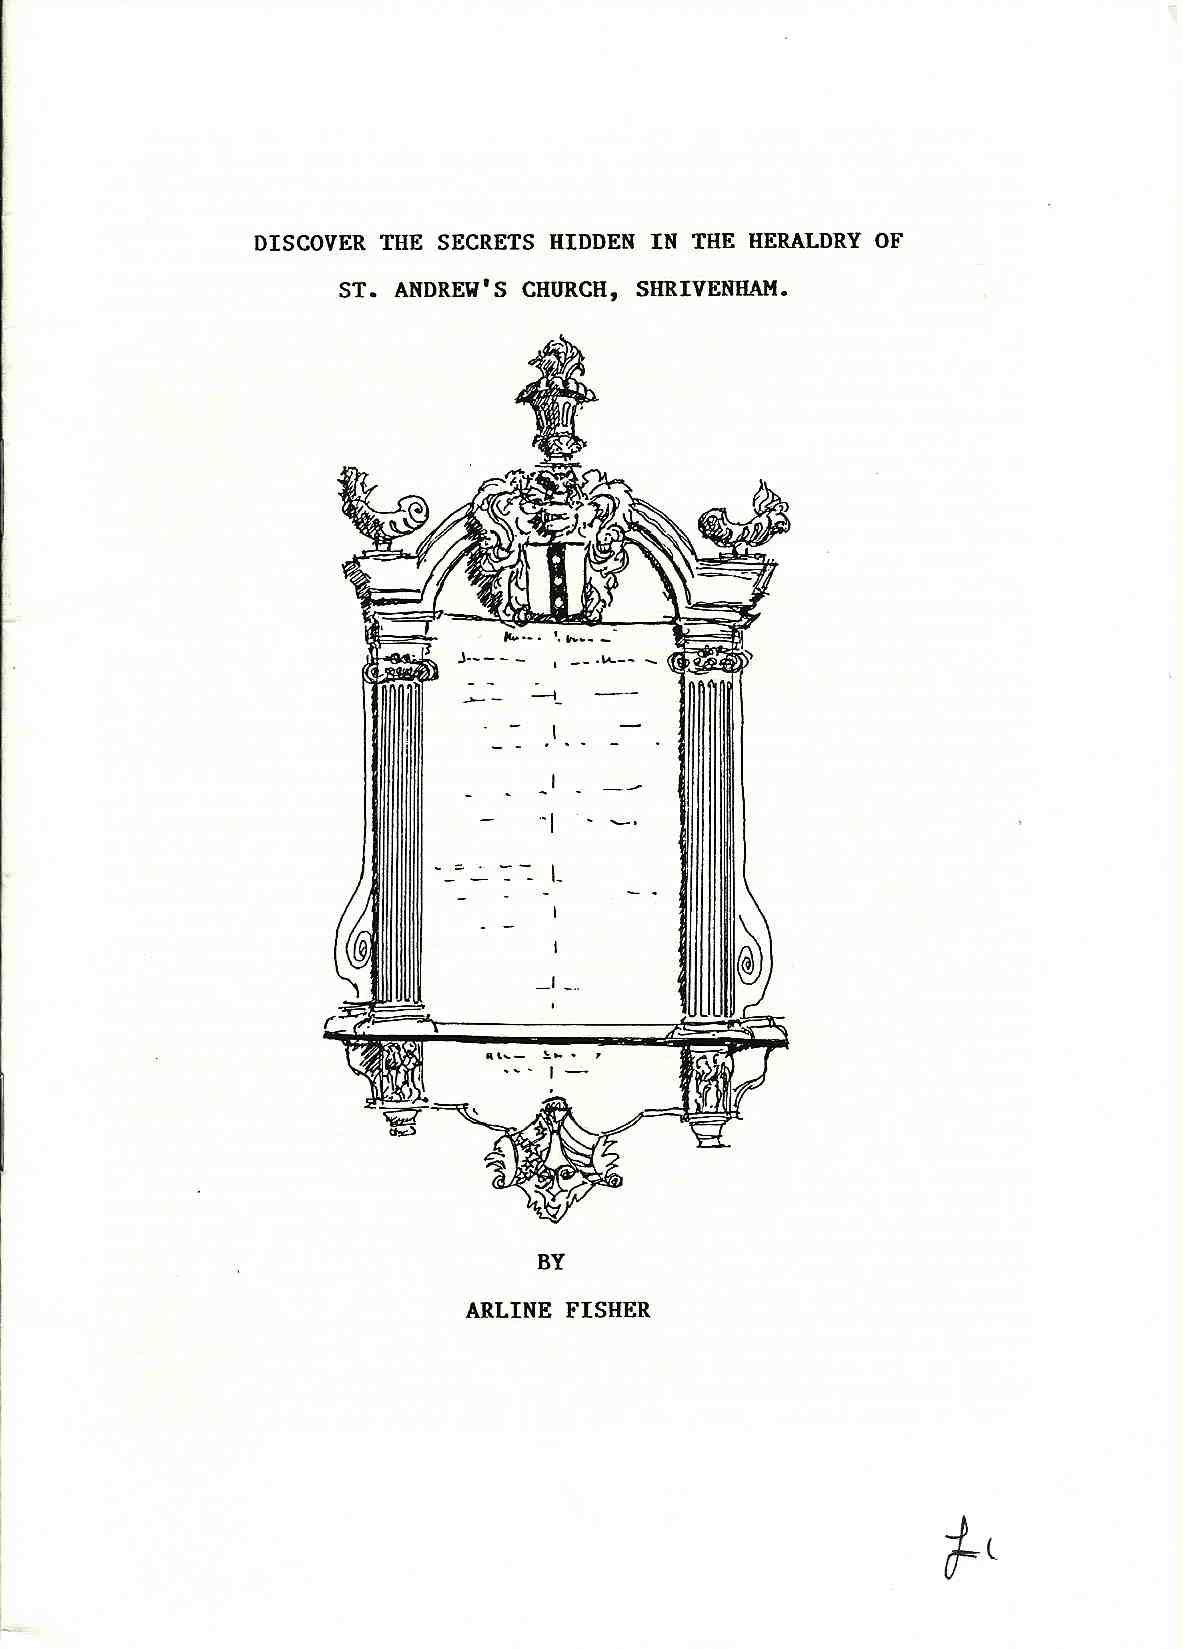 Front cover of the booklet